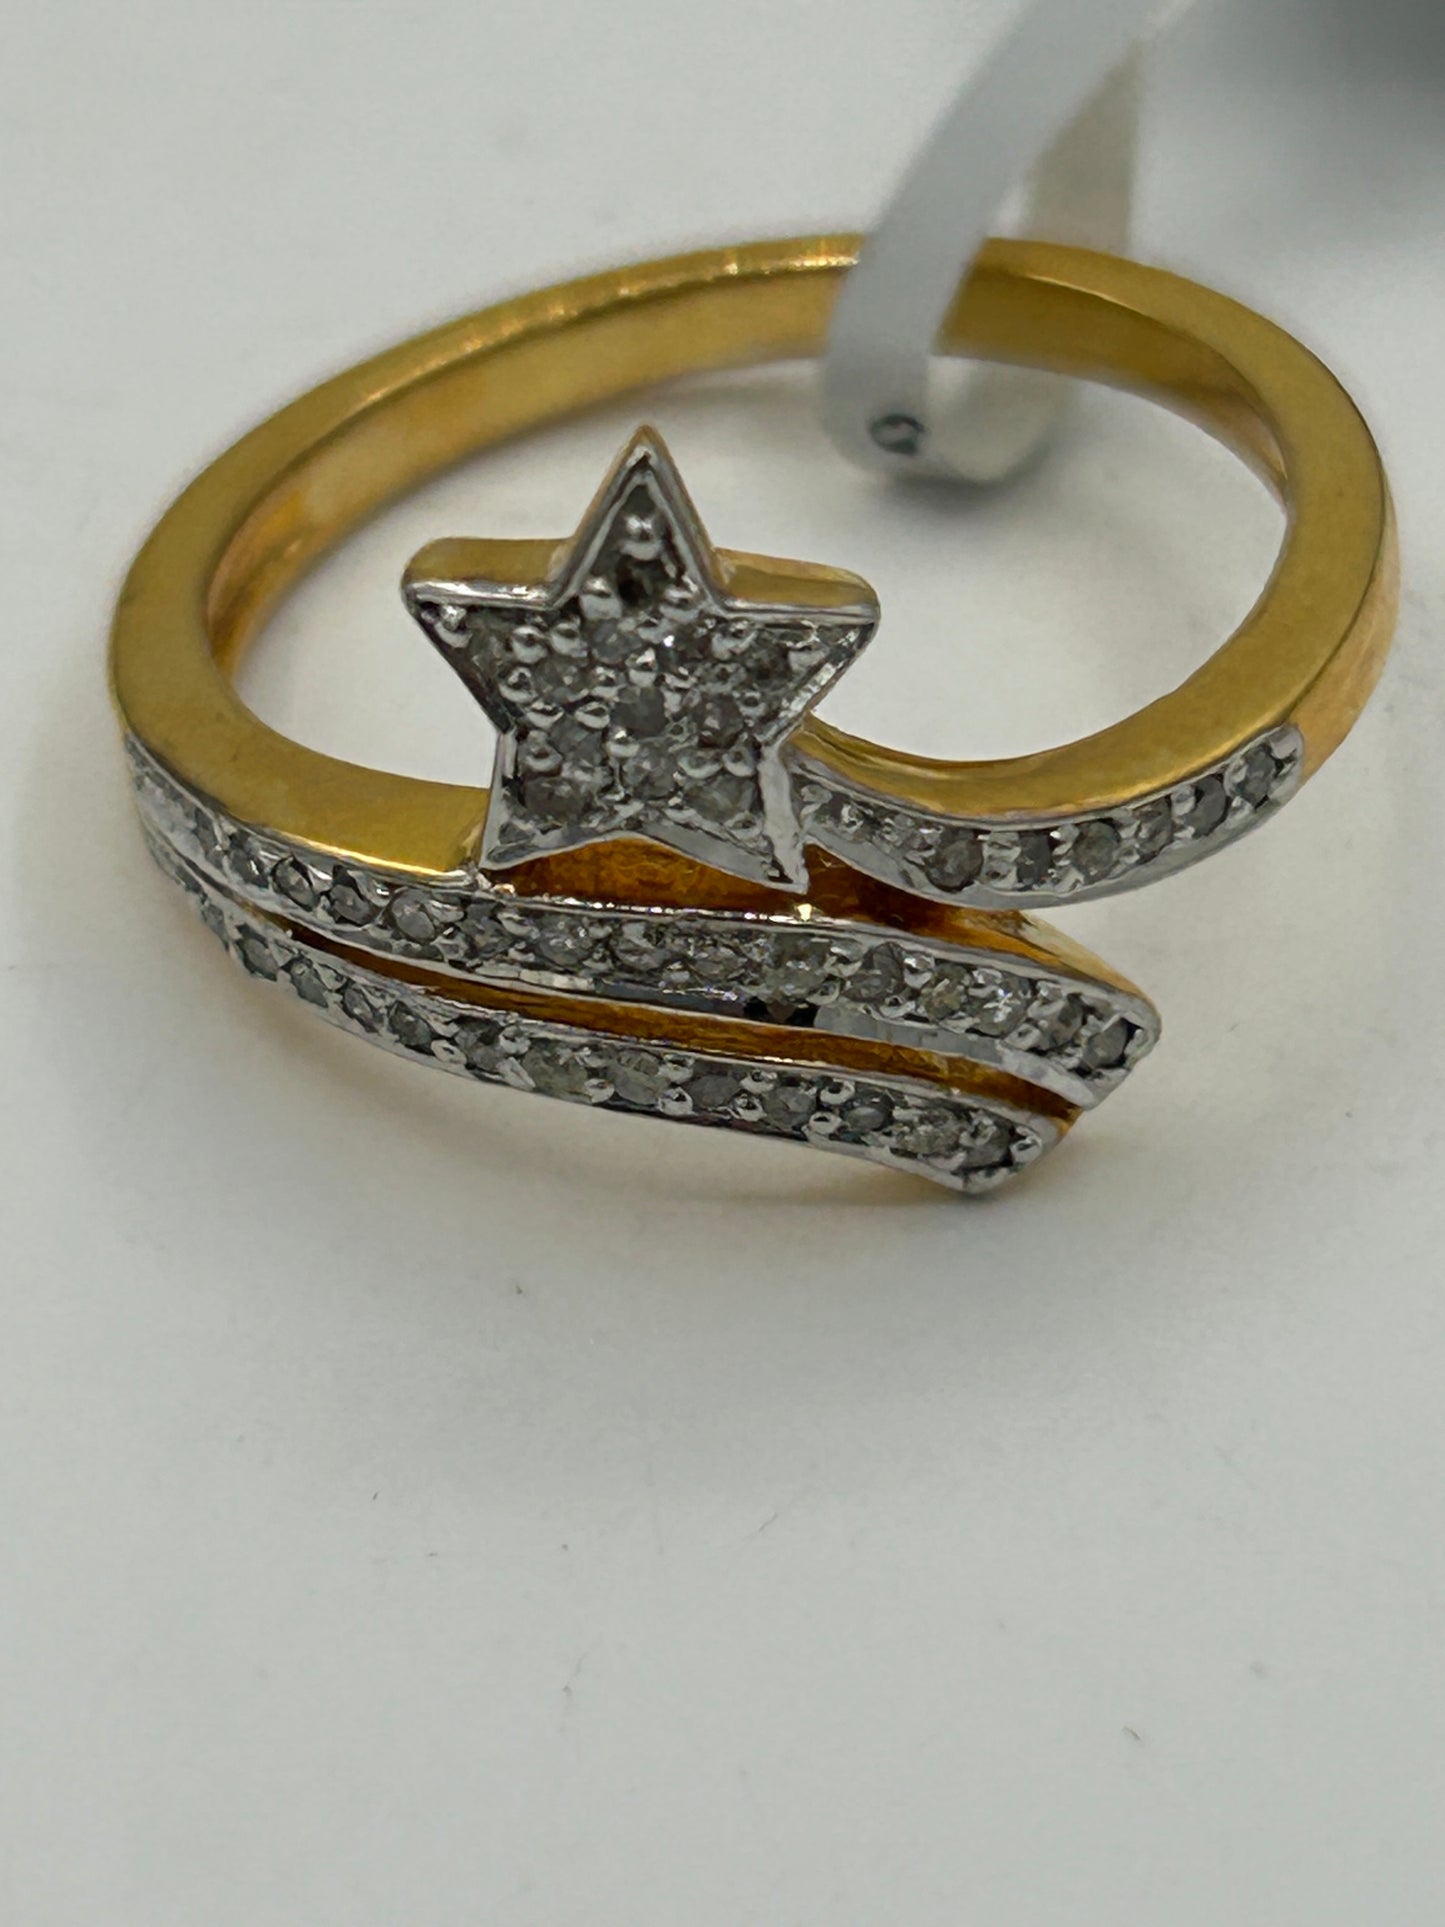 14k Solid Gold Star Diamond Rings. Genuine handmade pave diamond Rings. Approx Size 0.72 "(13 x 18 mm)